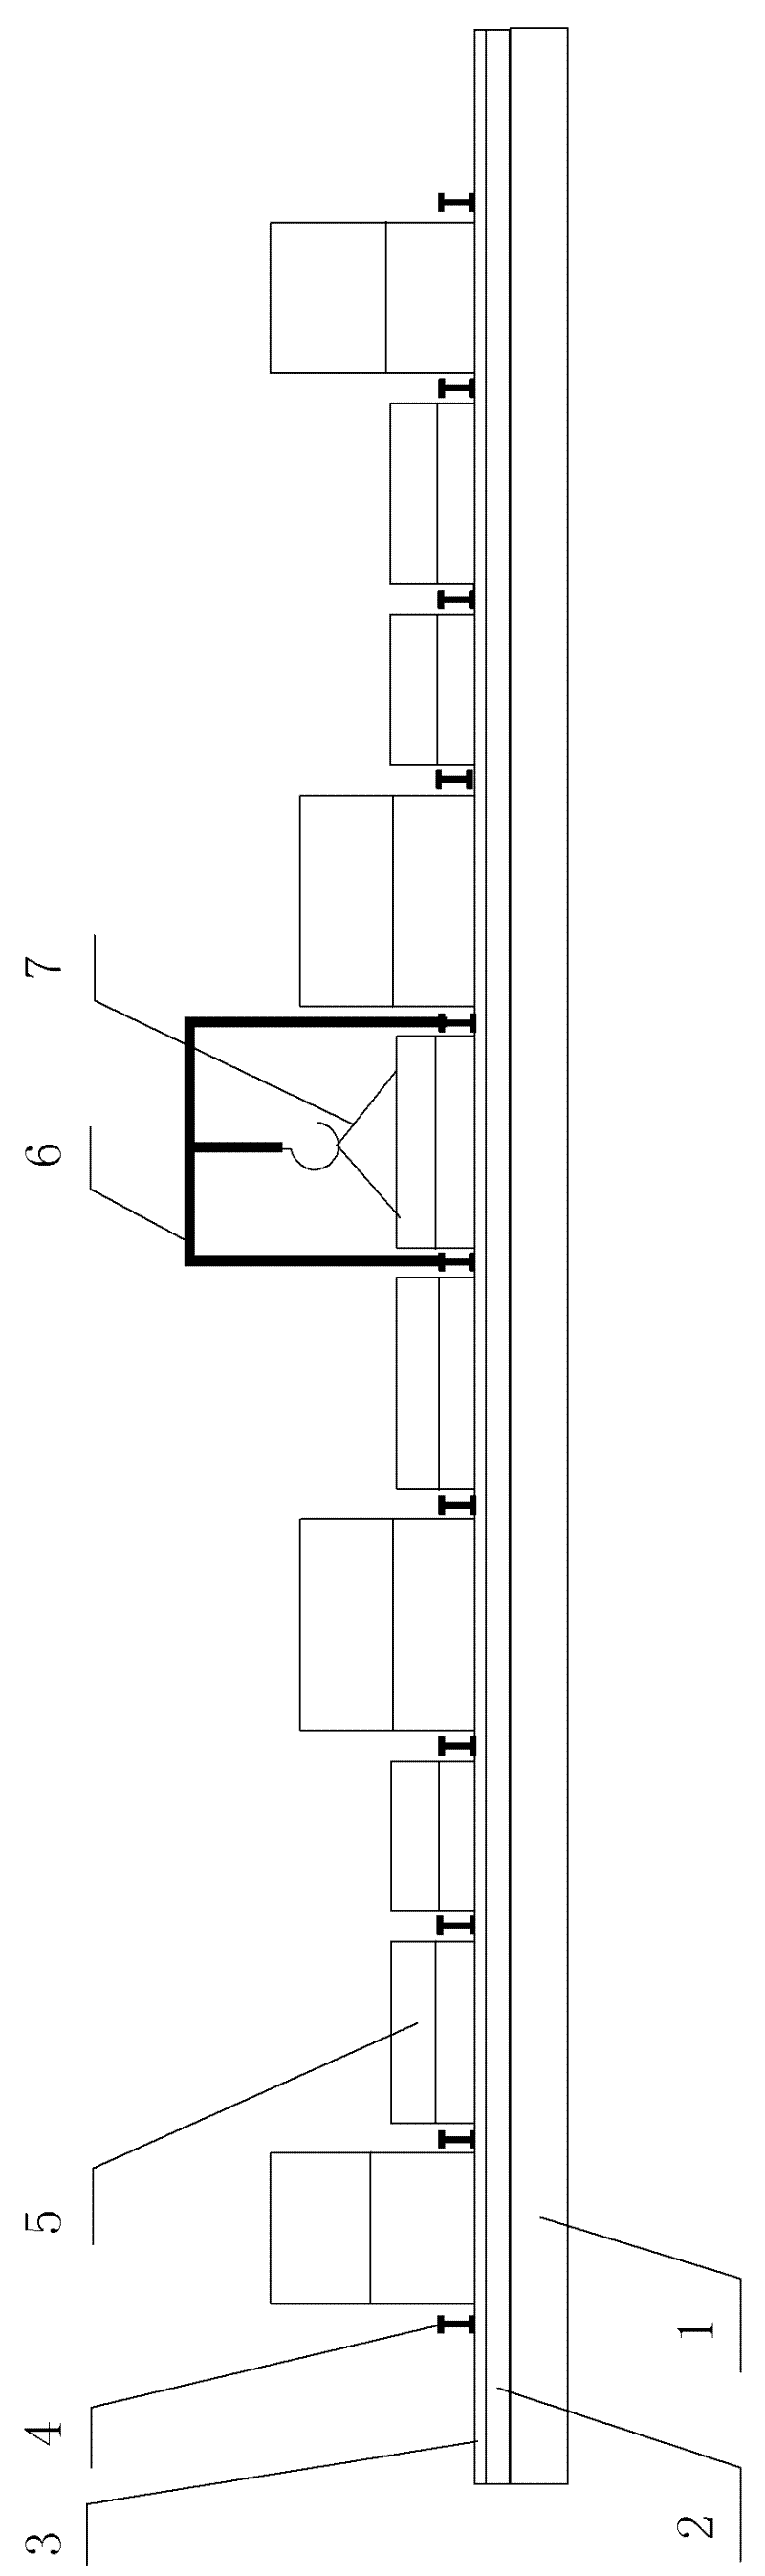 Method for carrying out load test on bridge support frame by prefabricated parts moved by electrically operated gallows frames